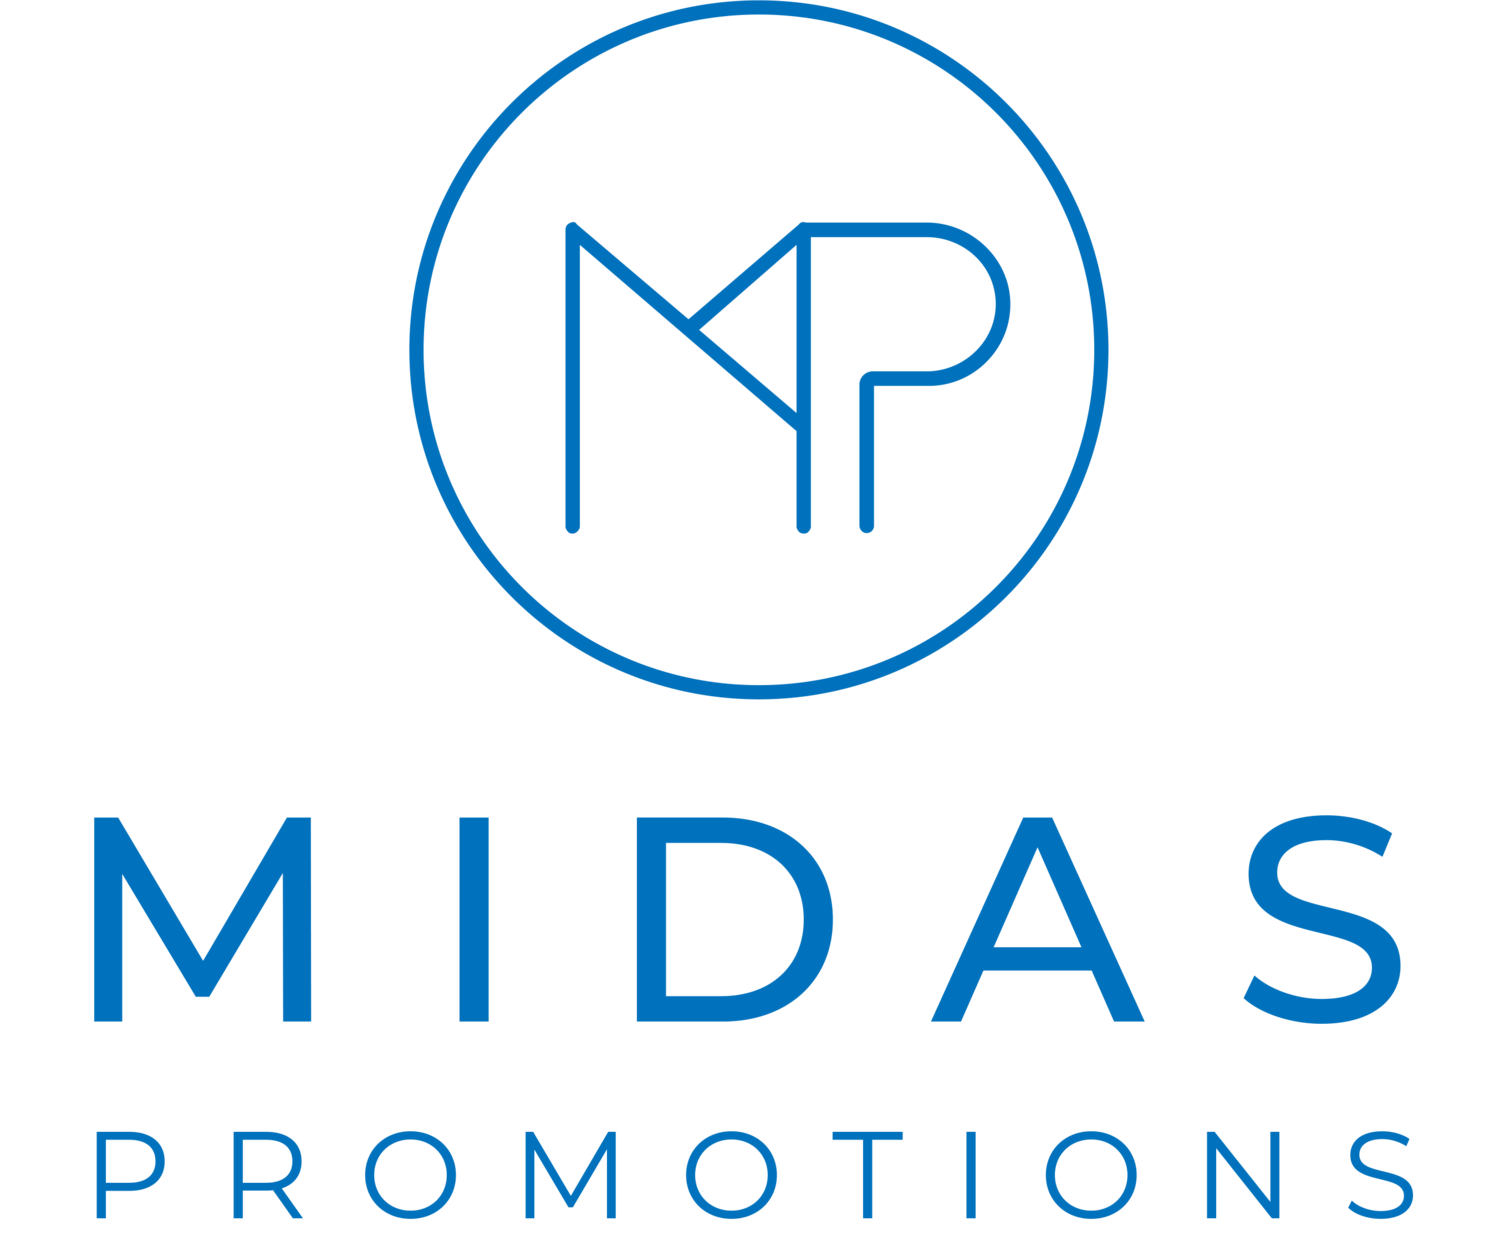 Promotional Products | Branded Merchandise | Corporate Gifts | Midas Promotions